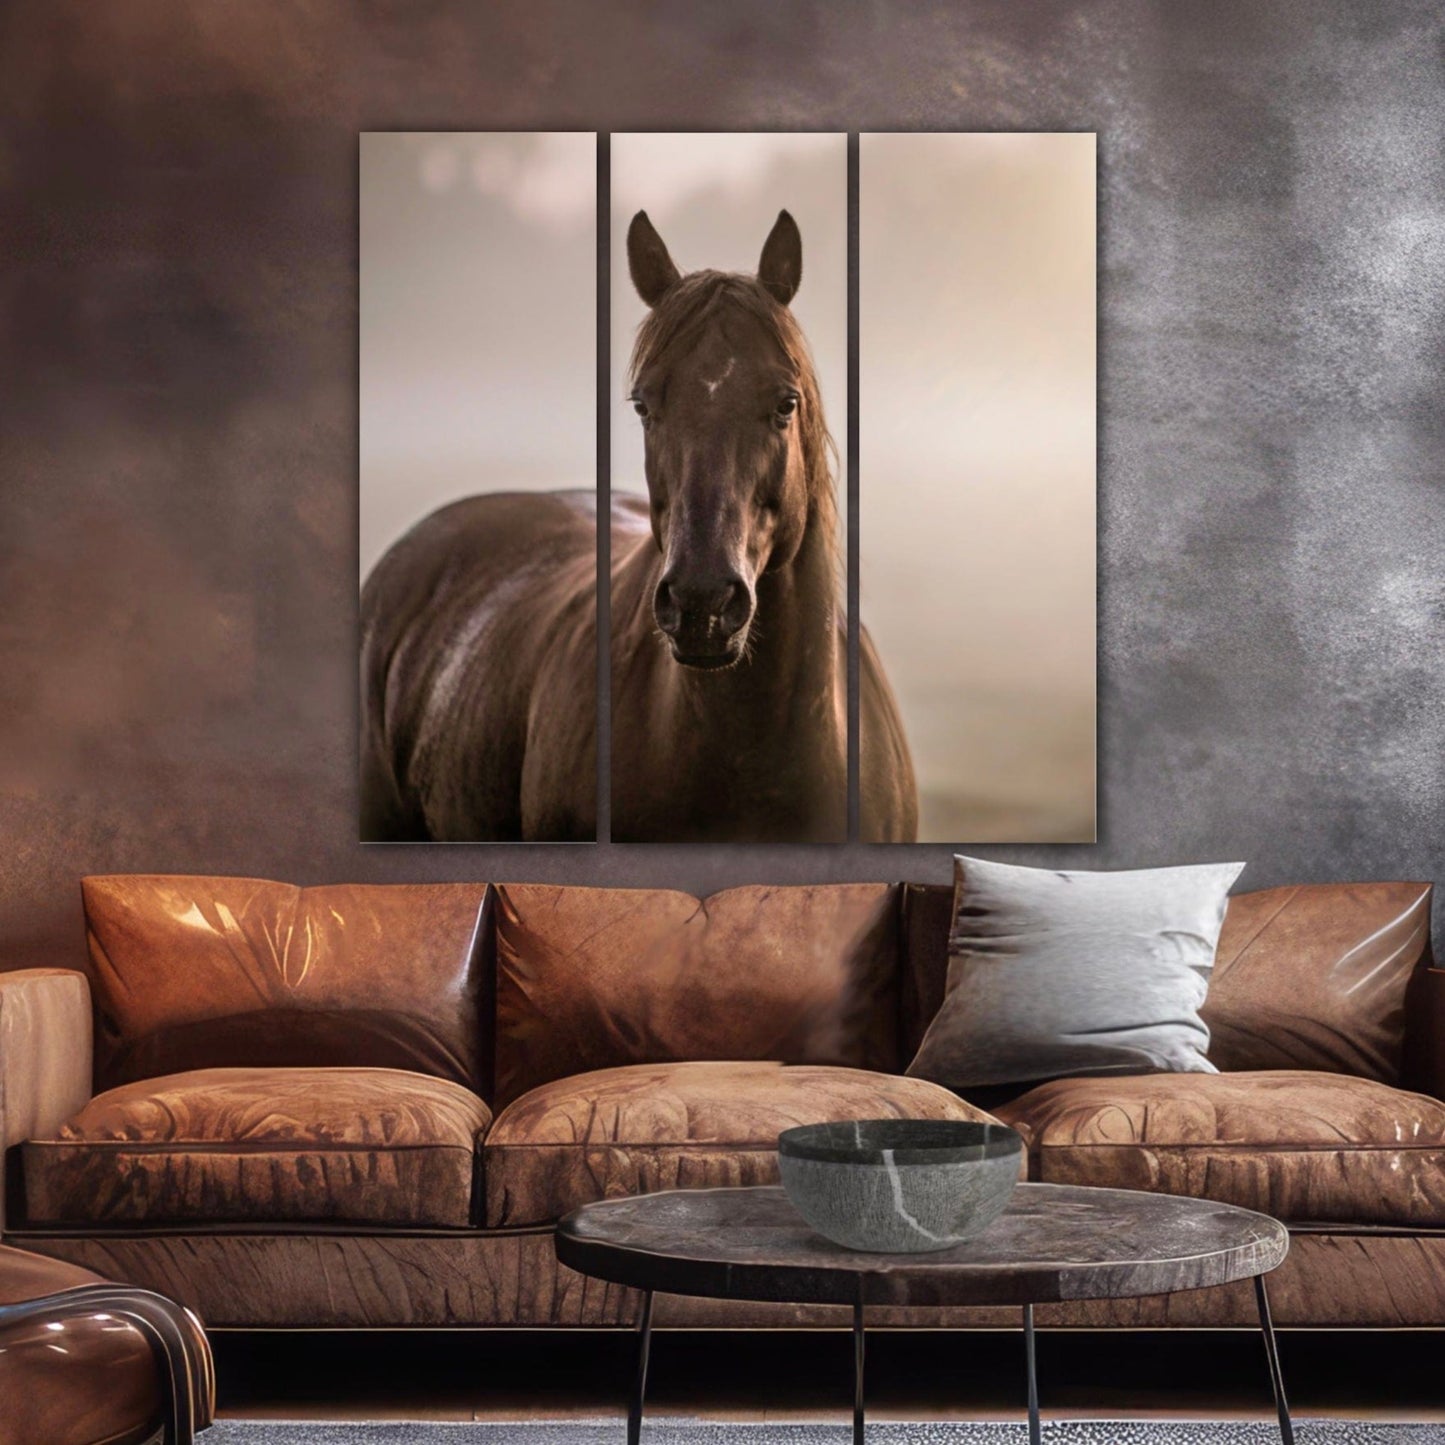 Square Horse Triptych 48" x 48" 48" x 48" (3 @ 16" x 48") Wall Art Teri James Photography